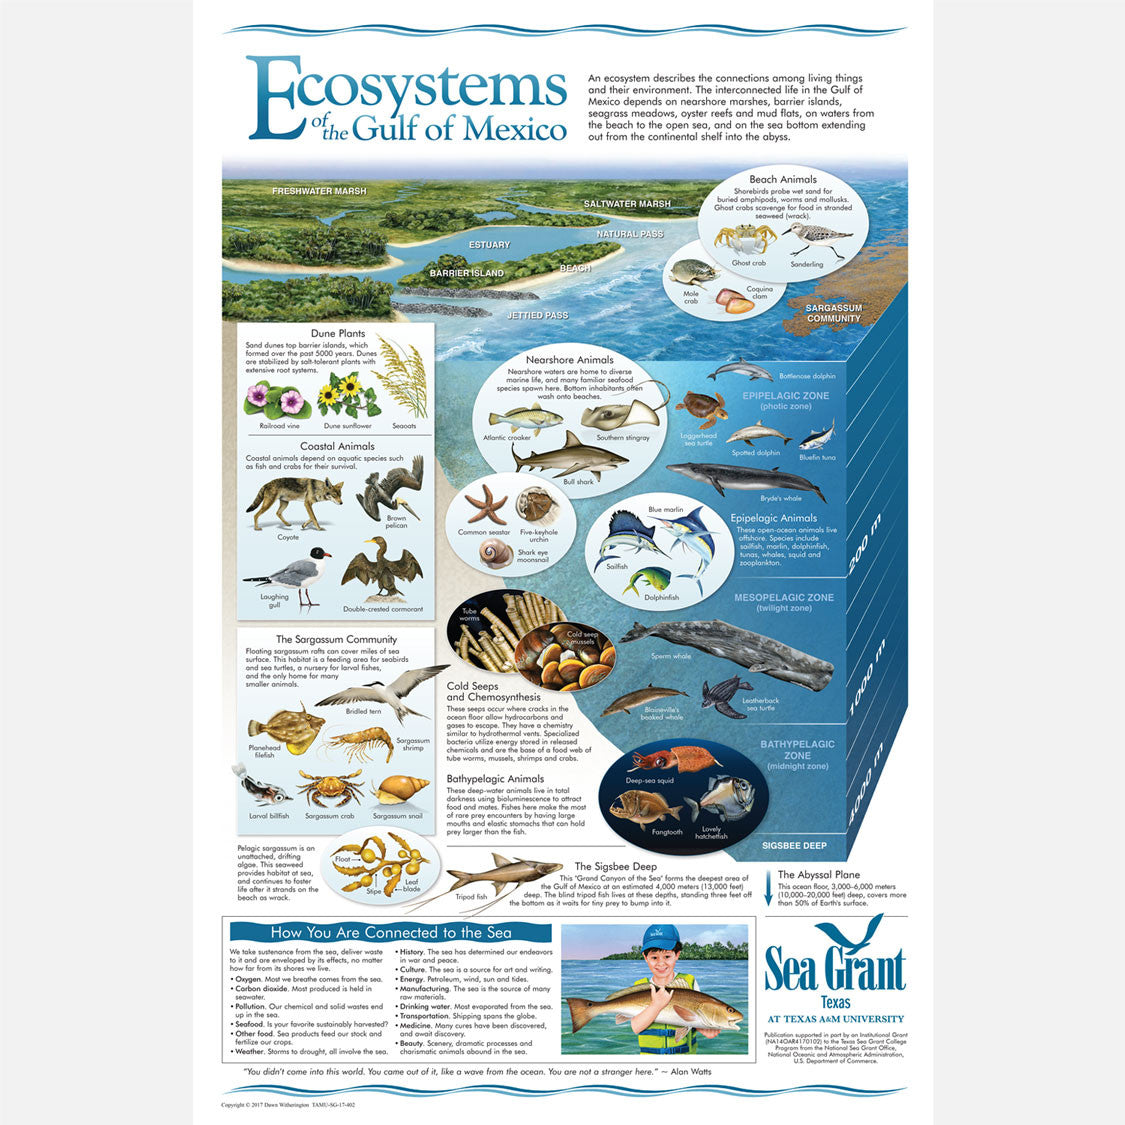 This beautiful poster provides information on the ecosystems of the Gulf of Mexico and how the are connected. 